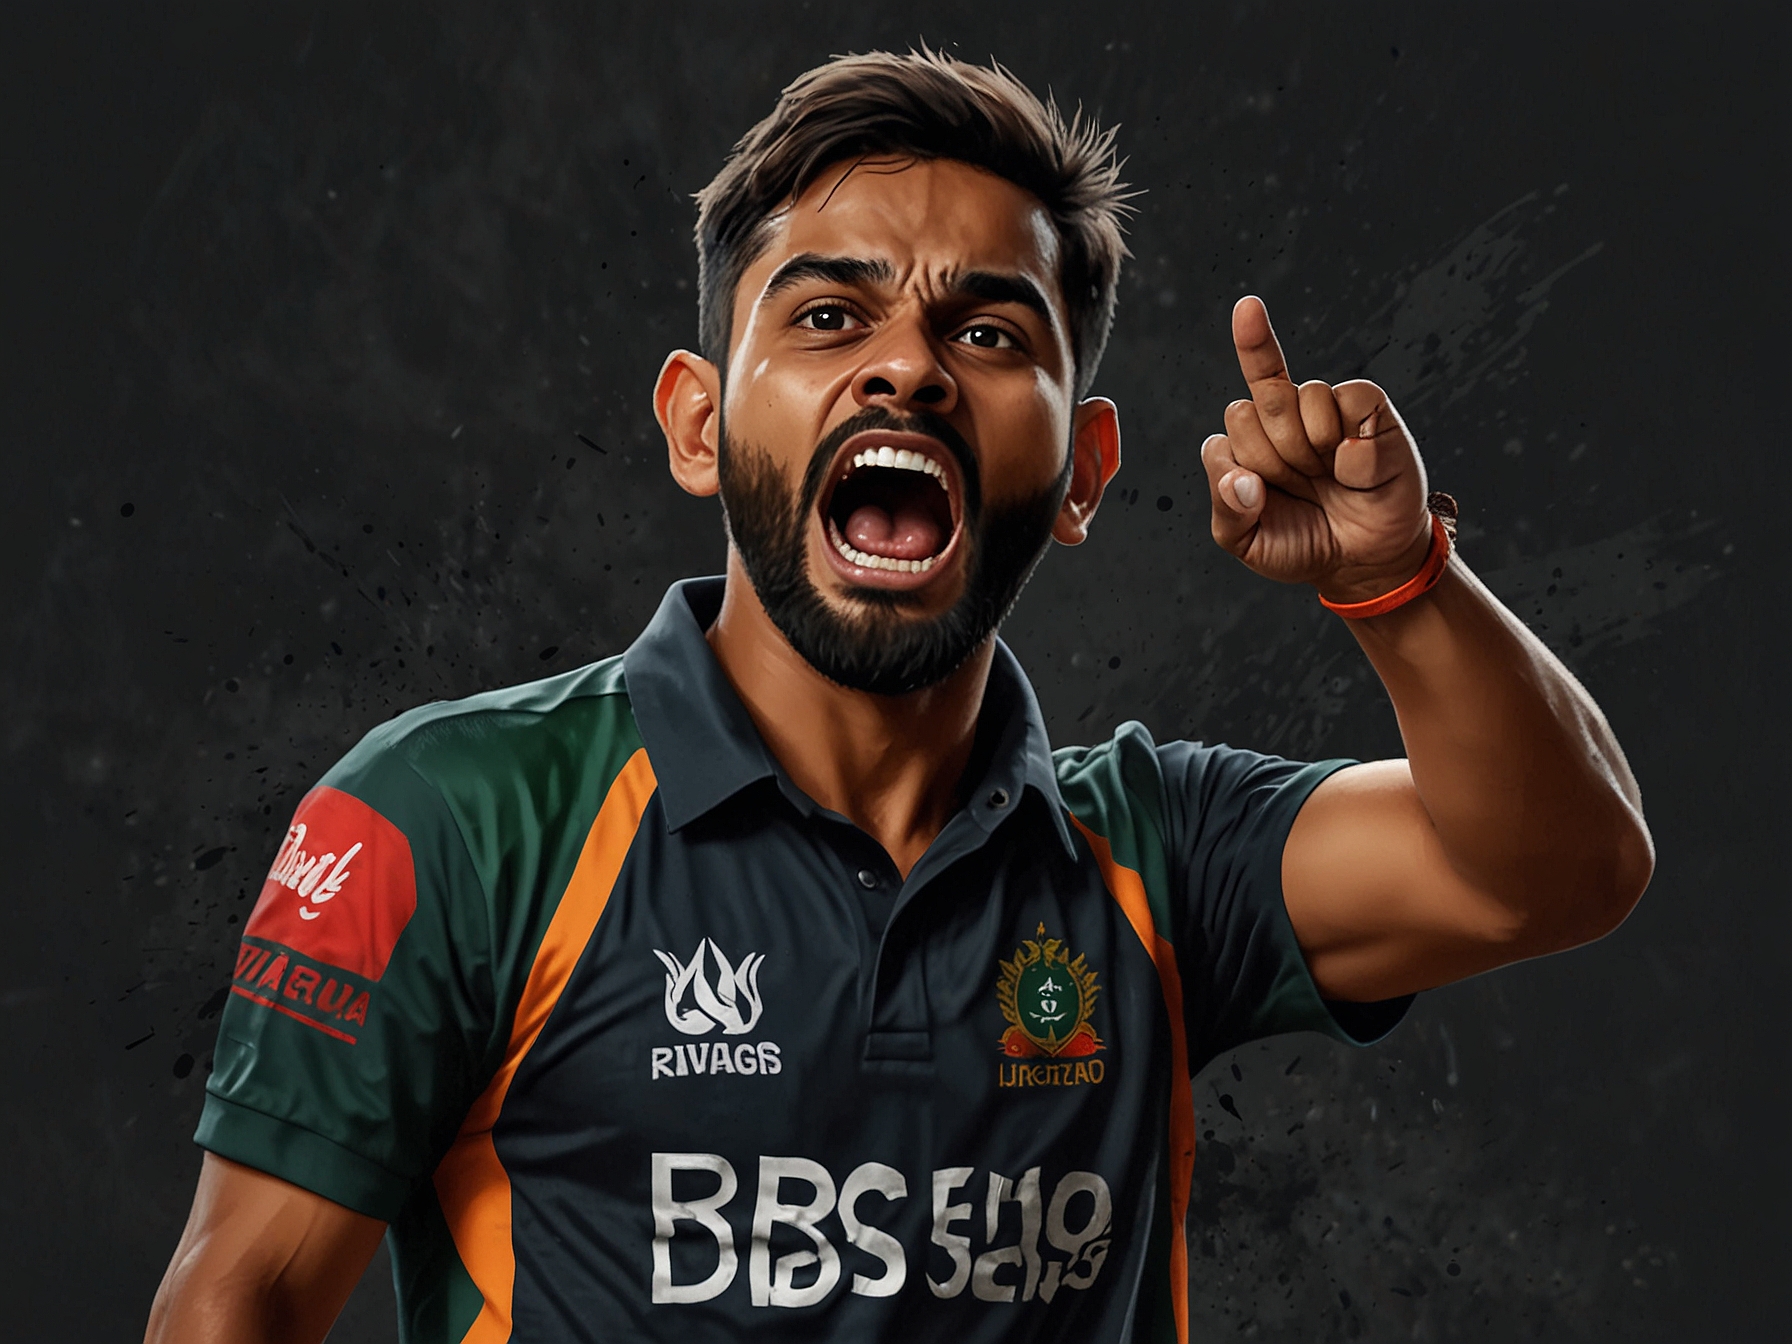 Tanzim Hasan roars with intense emotion after taking Virat Kohli's wicket. The Bangladeshi bowler's powerful send-off, featuring a roar and emphatic gestures, captures the high stakes of the T20 World Cup 2024.